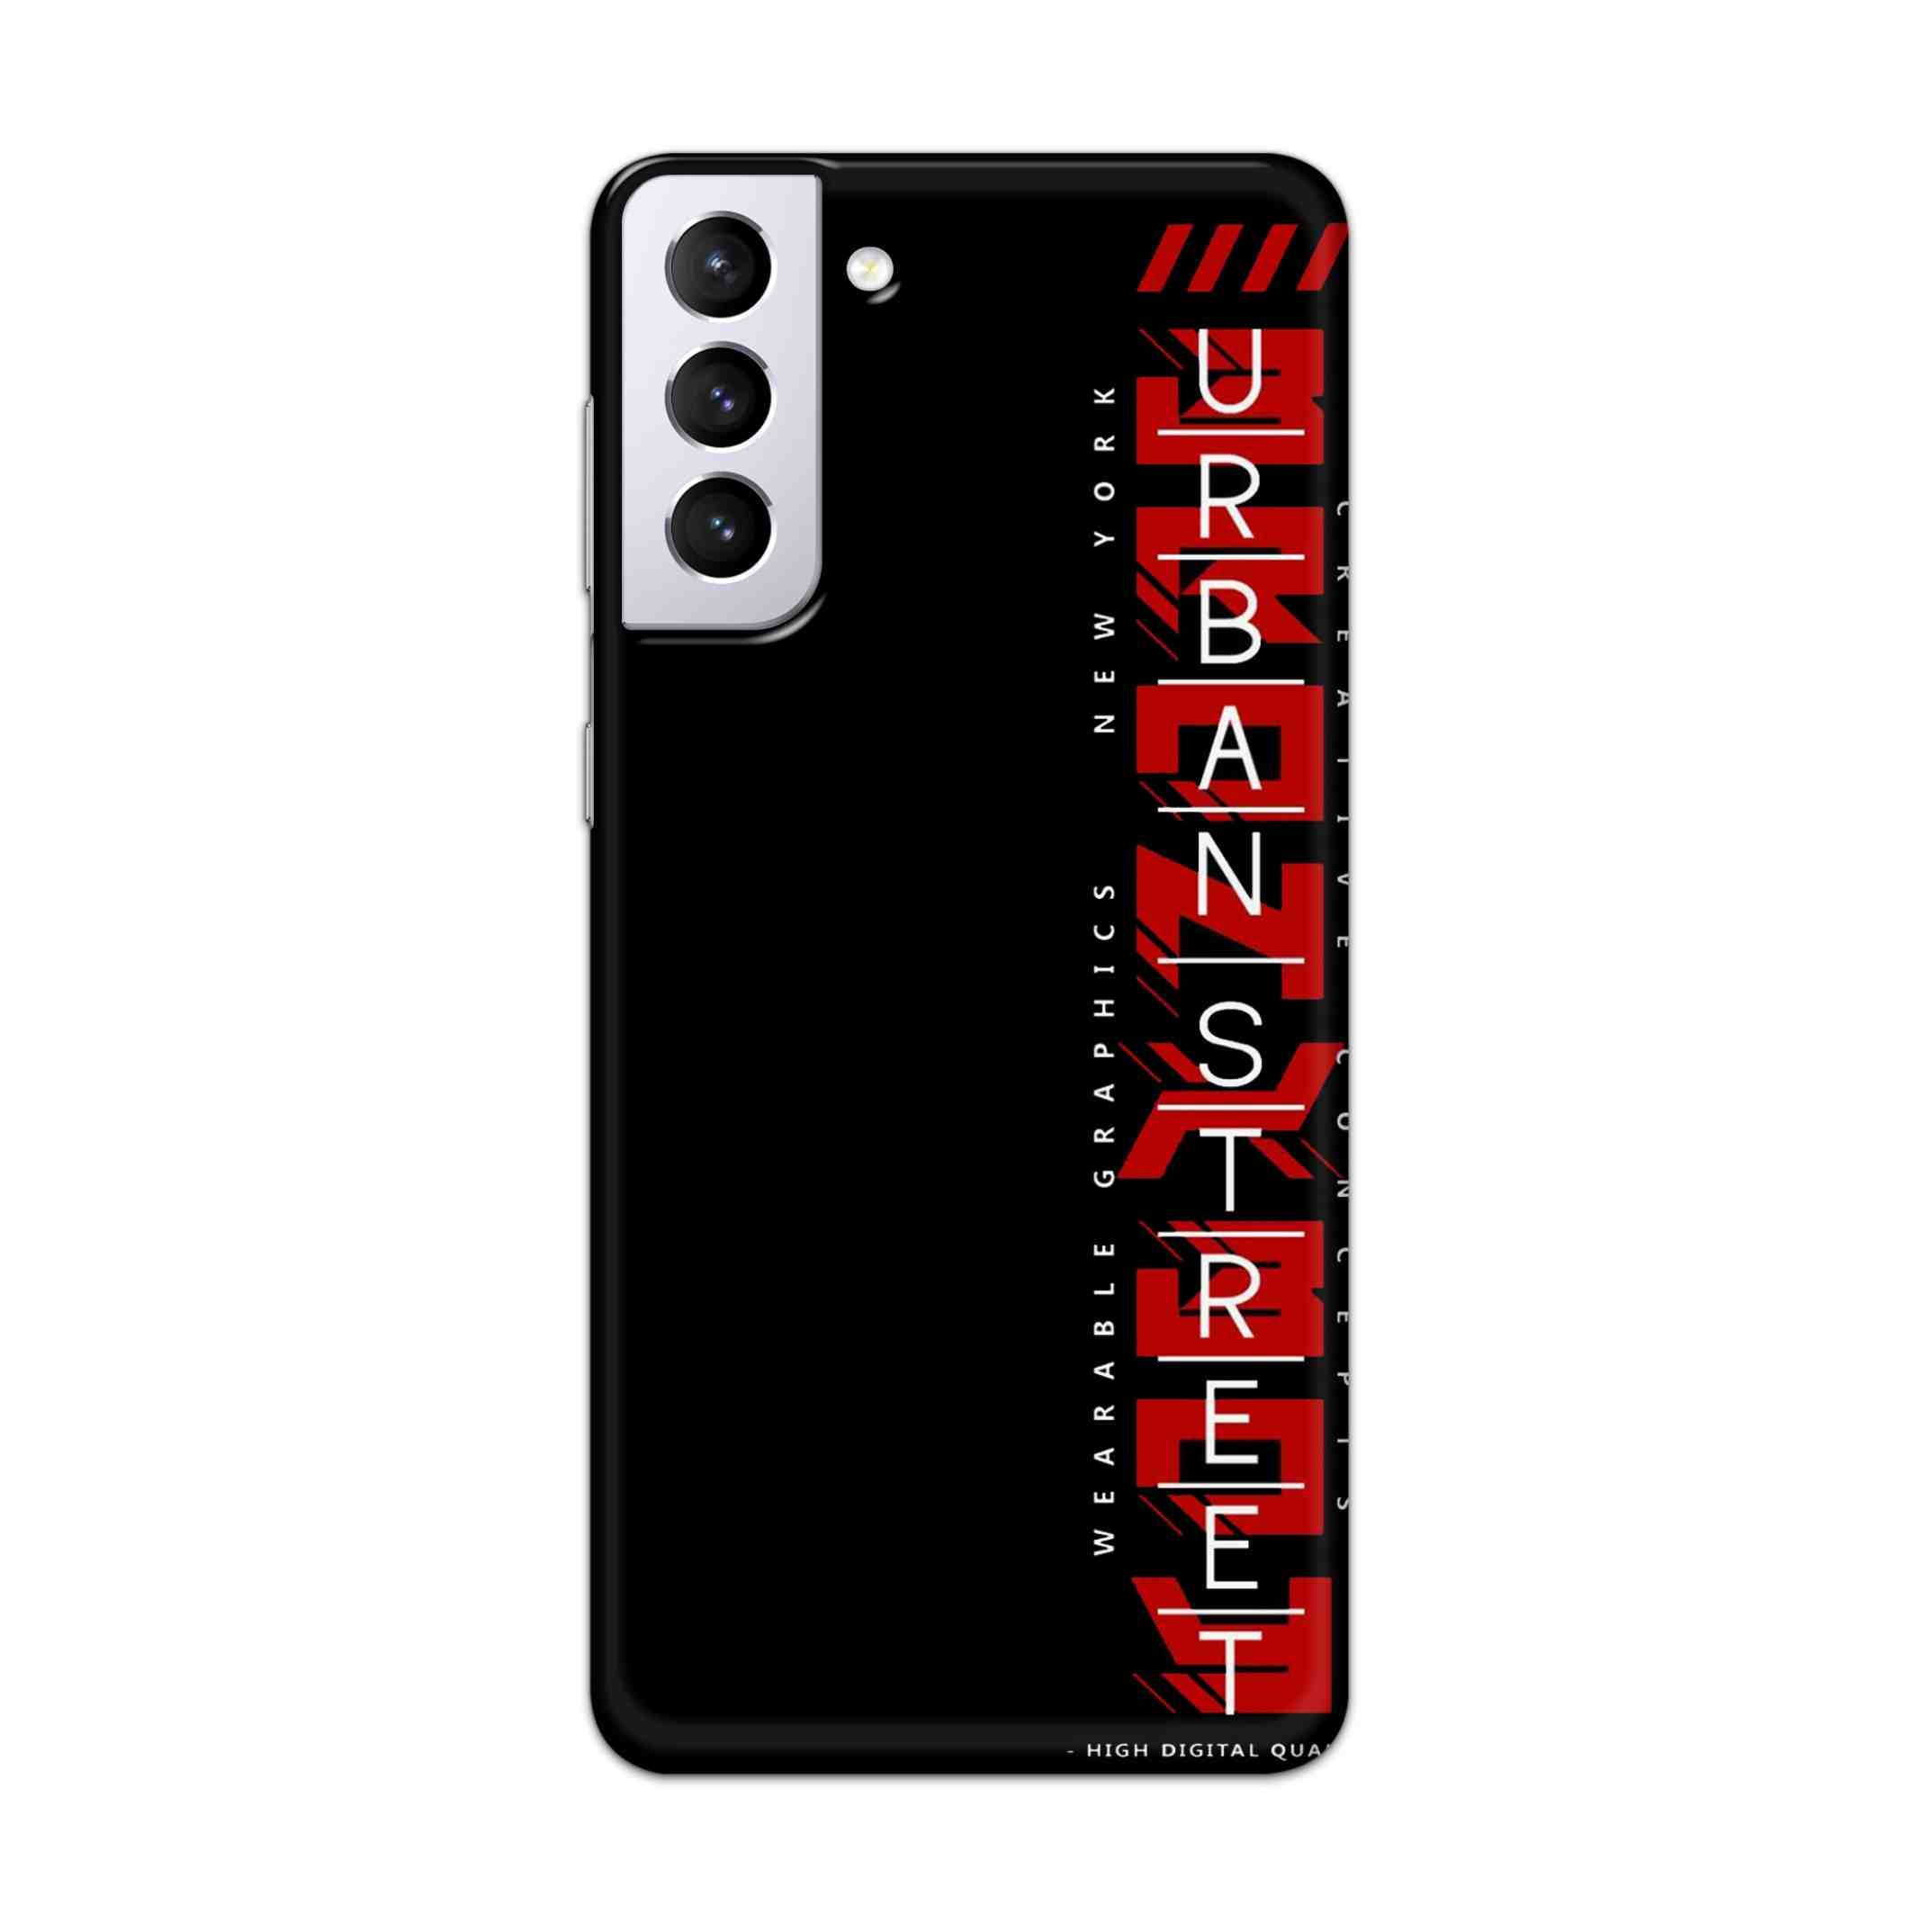 Buy Urban Street Hard Back Mobile Phone Case Cover For Samsung Galaxy S21 Online